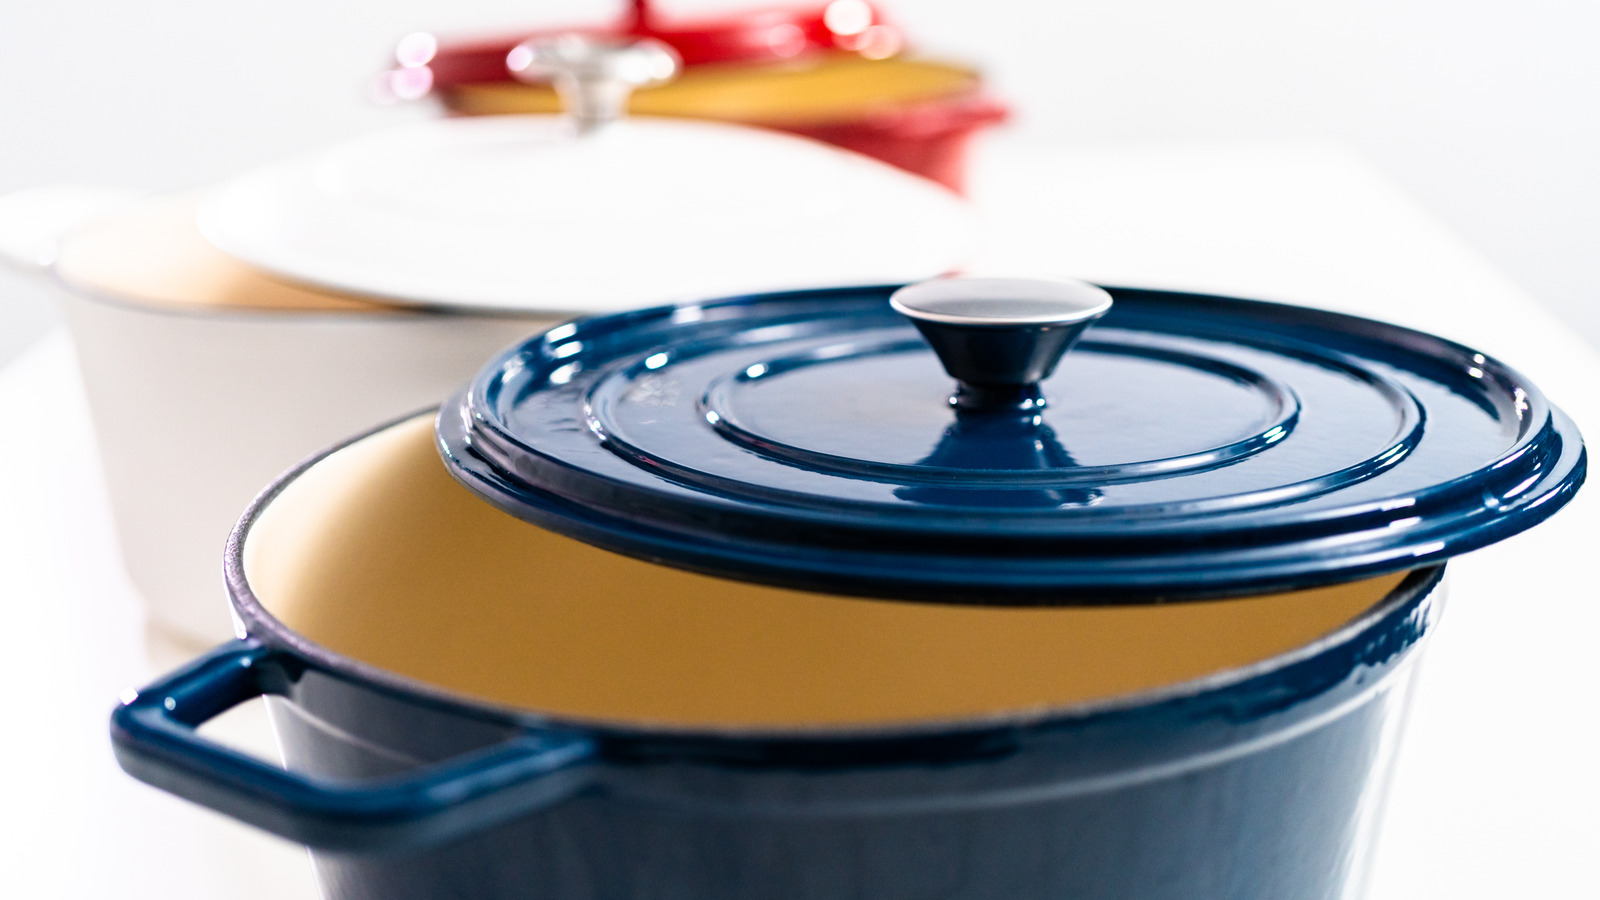 How to Clean a Dutch Oven - Best Ways to Clean an Enameled Cast Iron Dutch  Oven